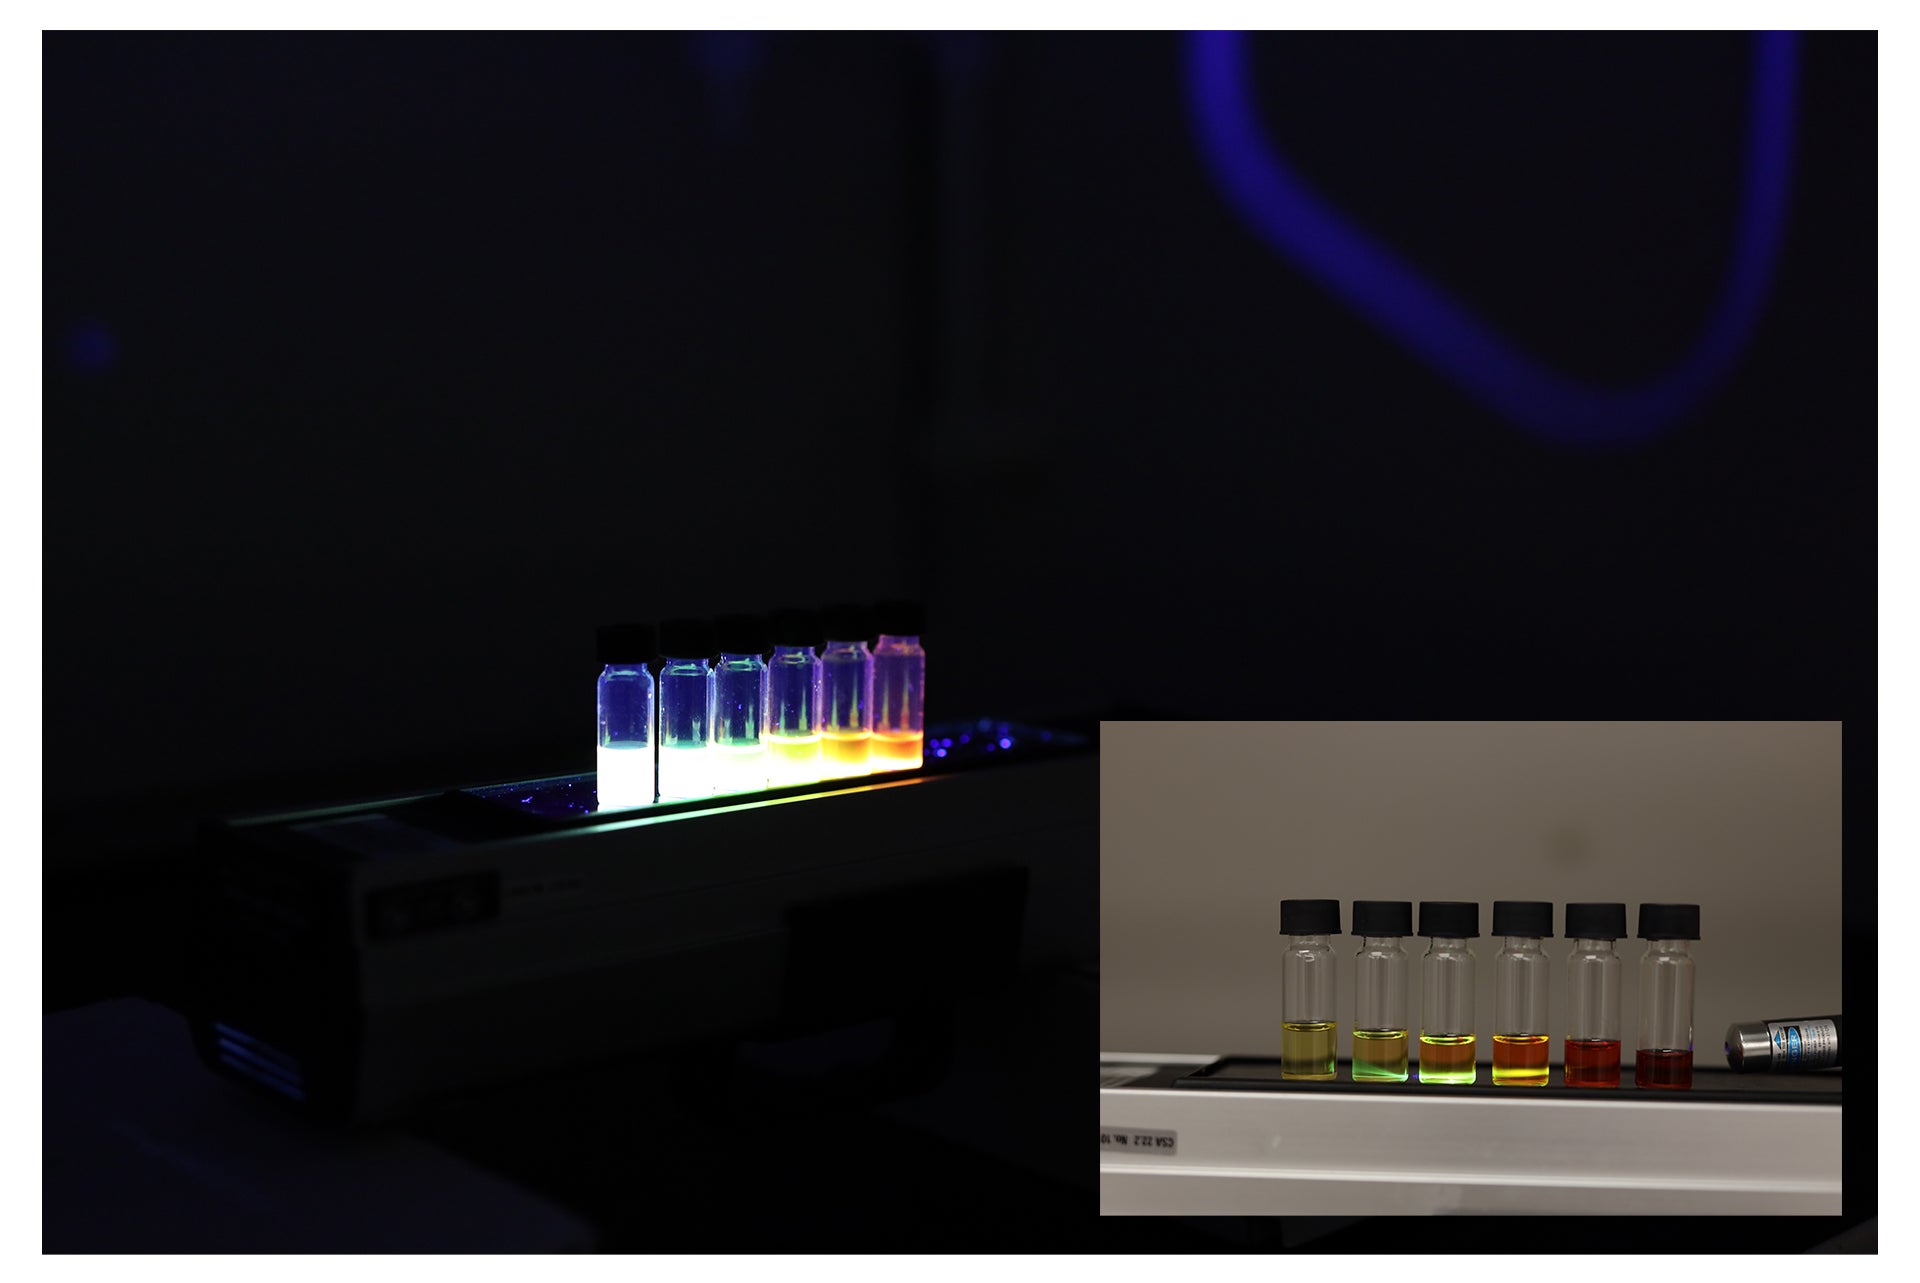 Samples fluorescing different colors in the dark and under natural light.